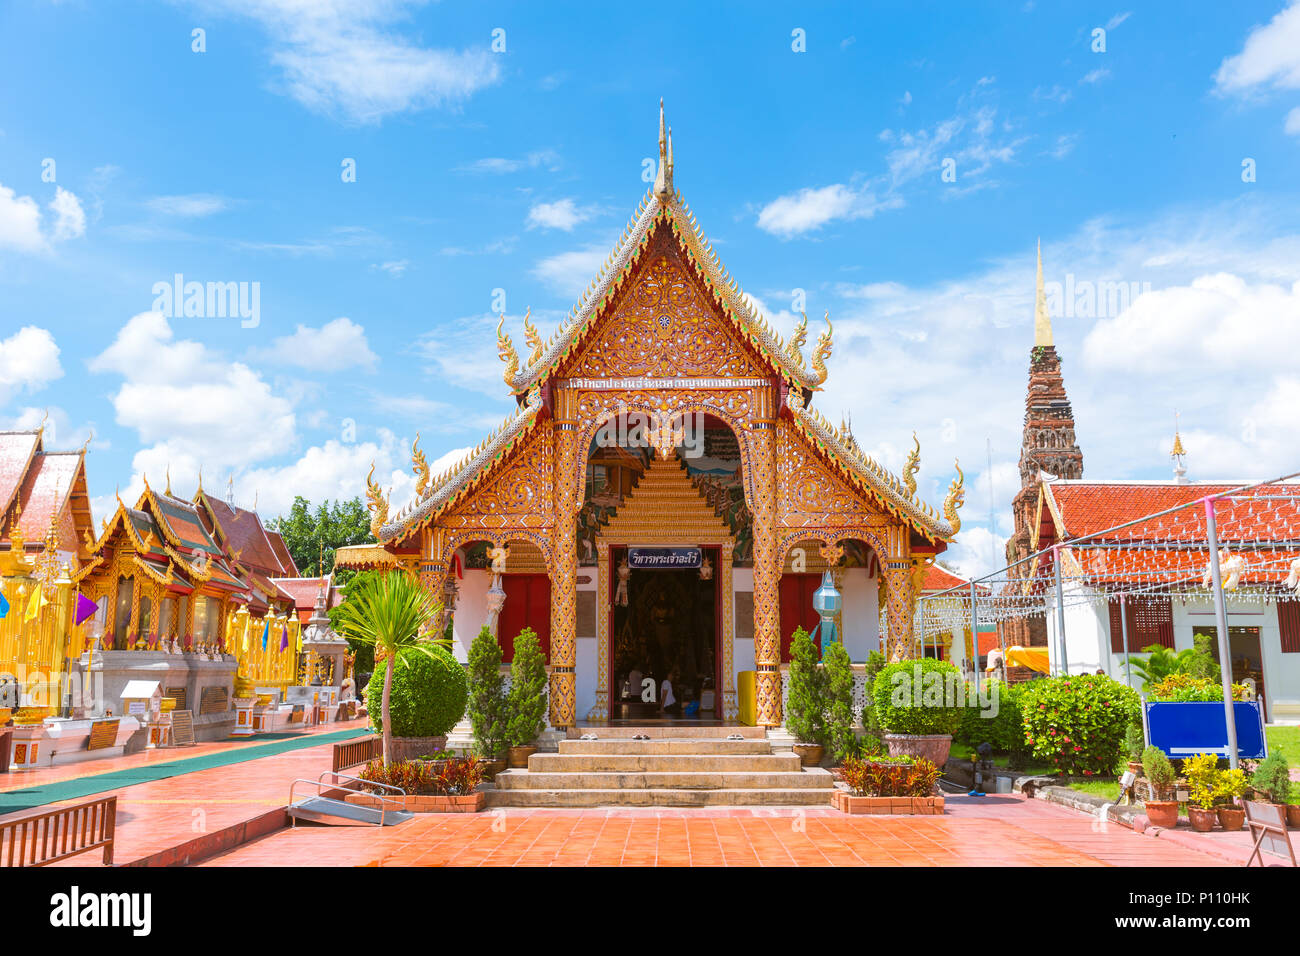 Wat phra that hariphunchai Temple lamphun Most beautiful and most ...